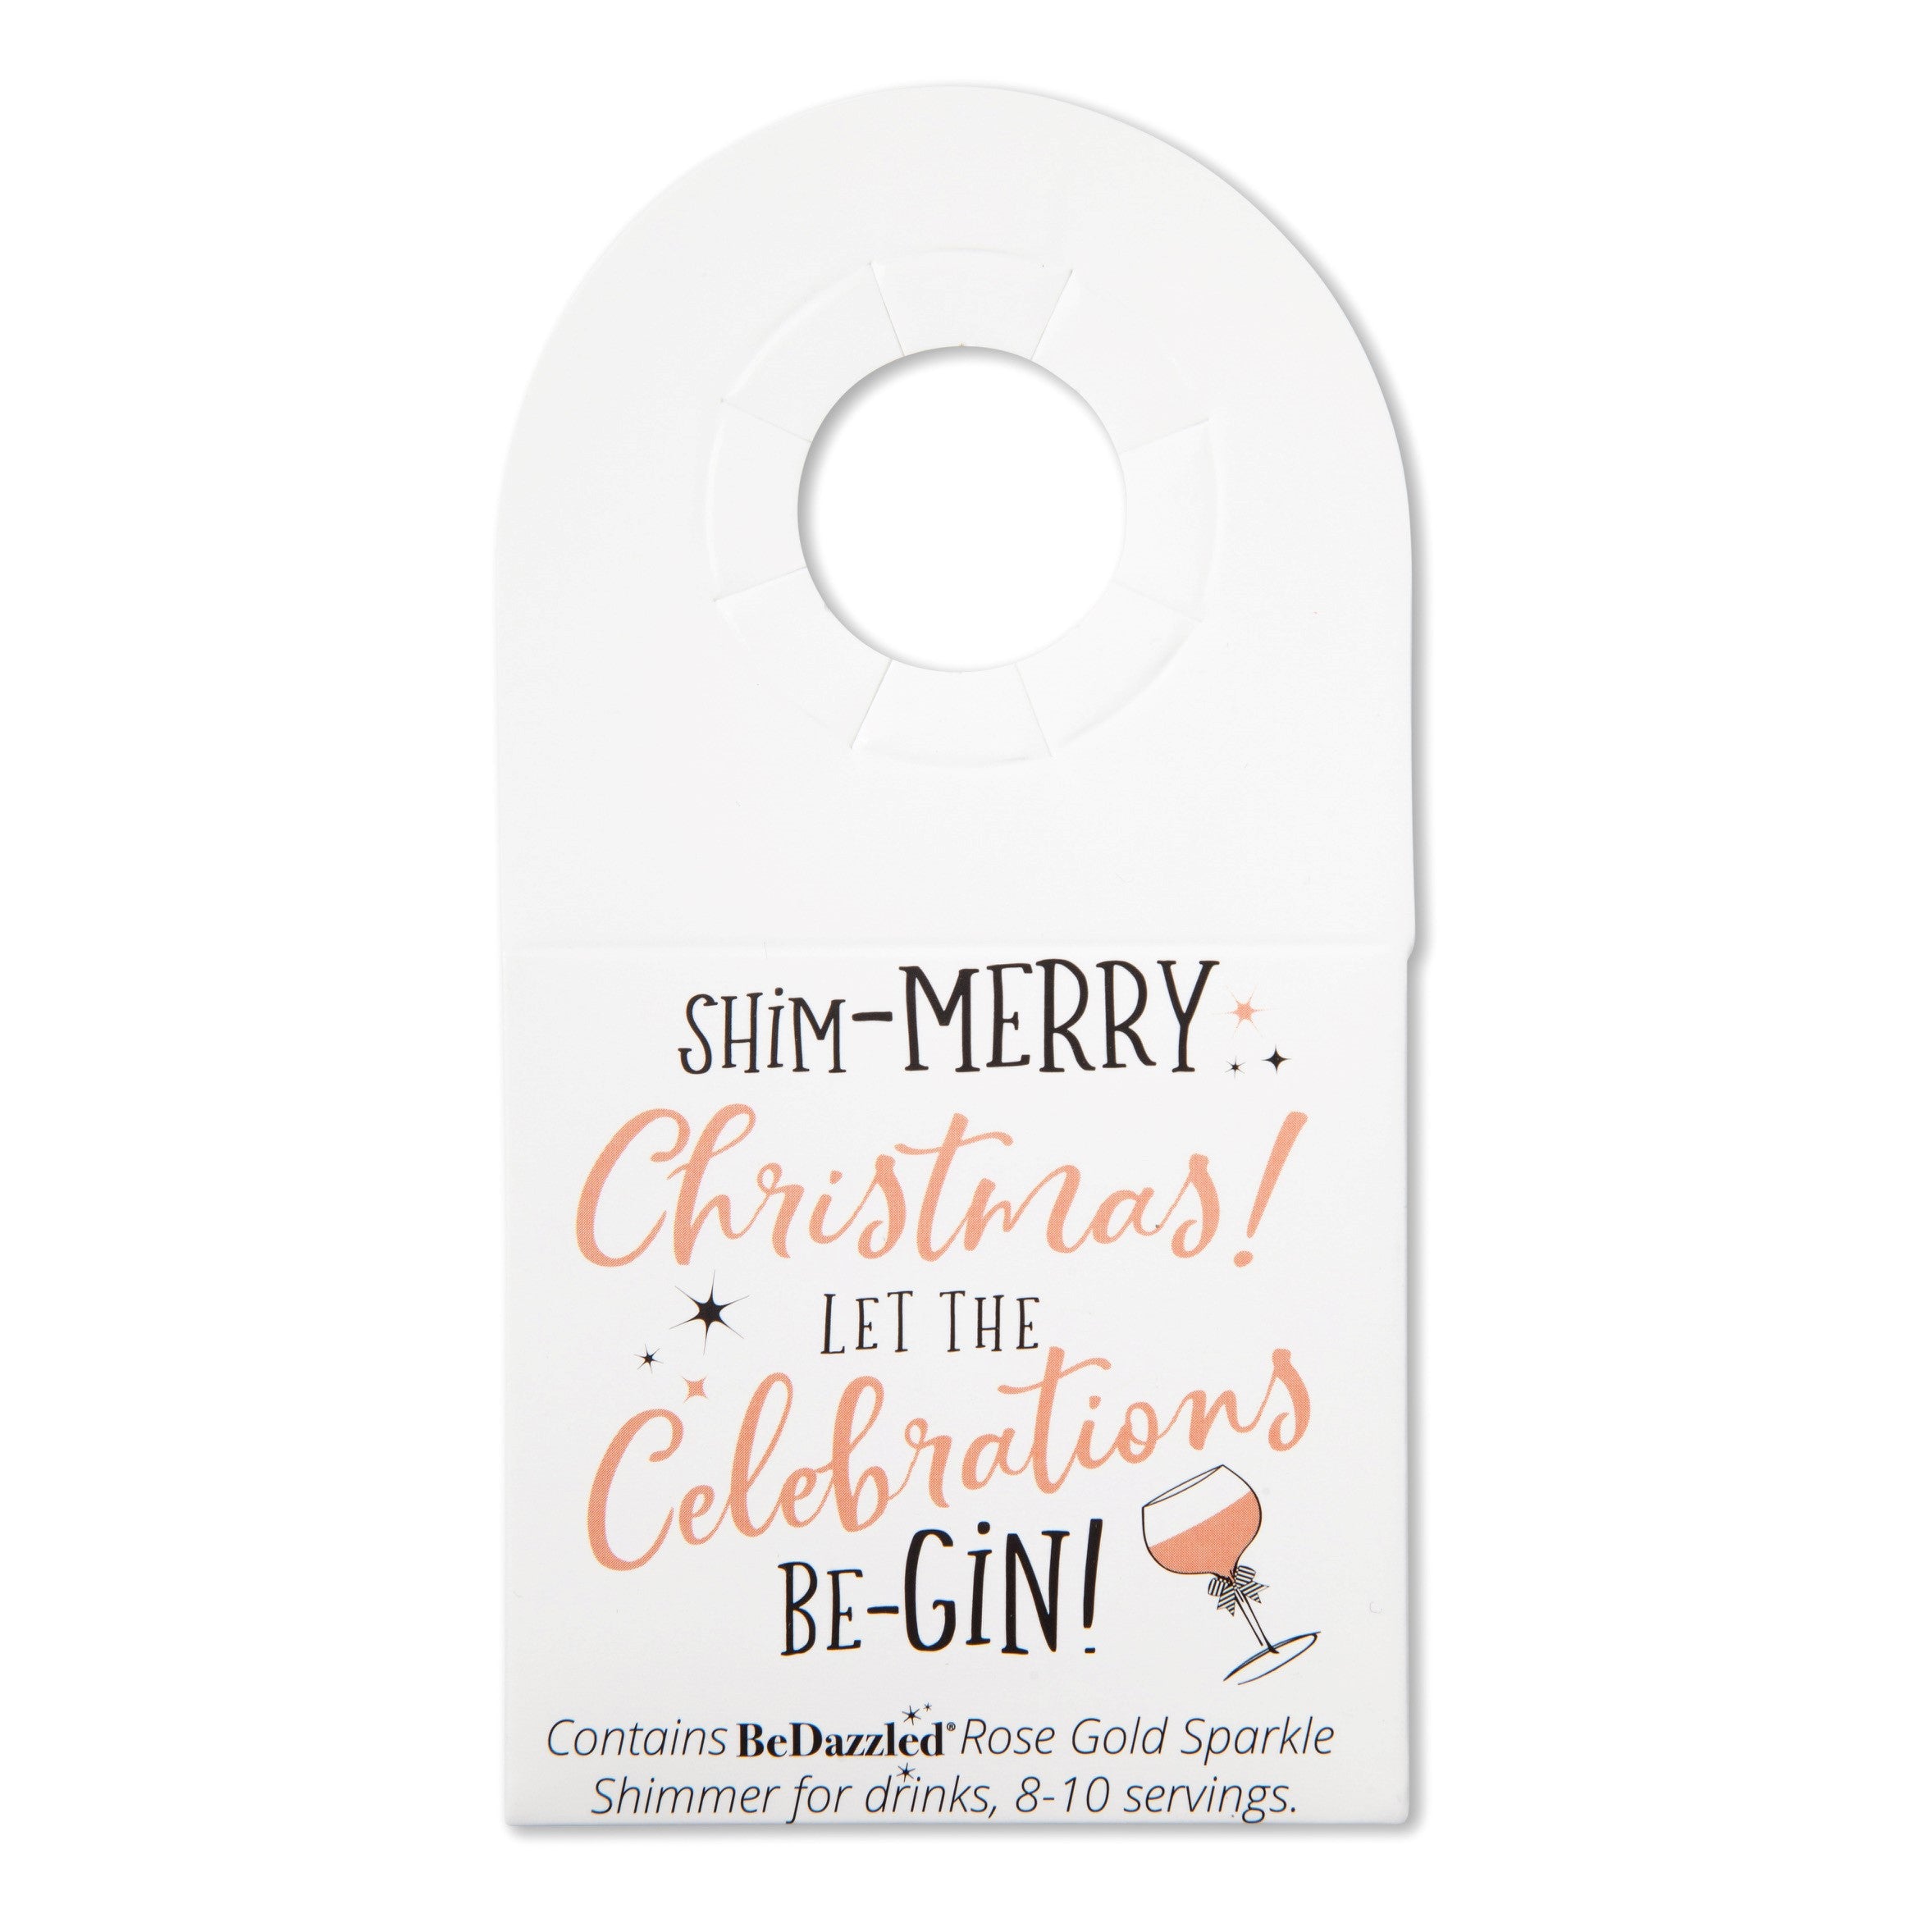 Shim-Merry Christmas! Let the celebrations beGIN! Bottle tag containing ROSE GOLD shimmer